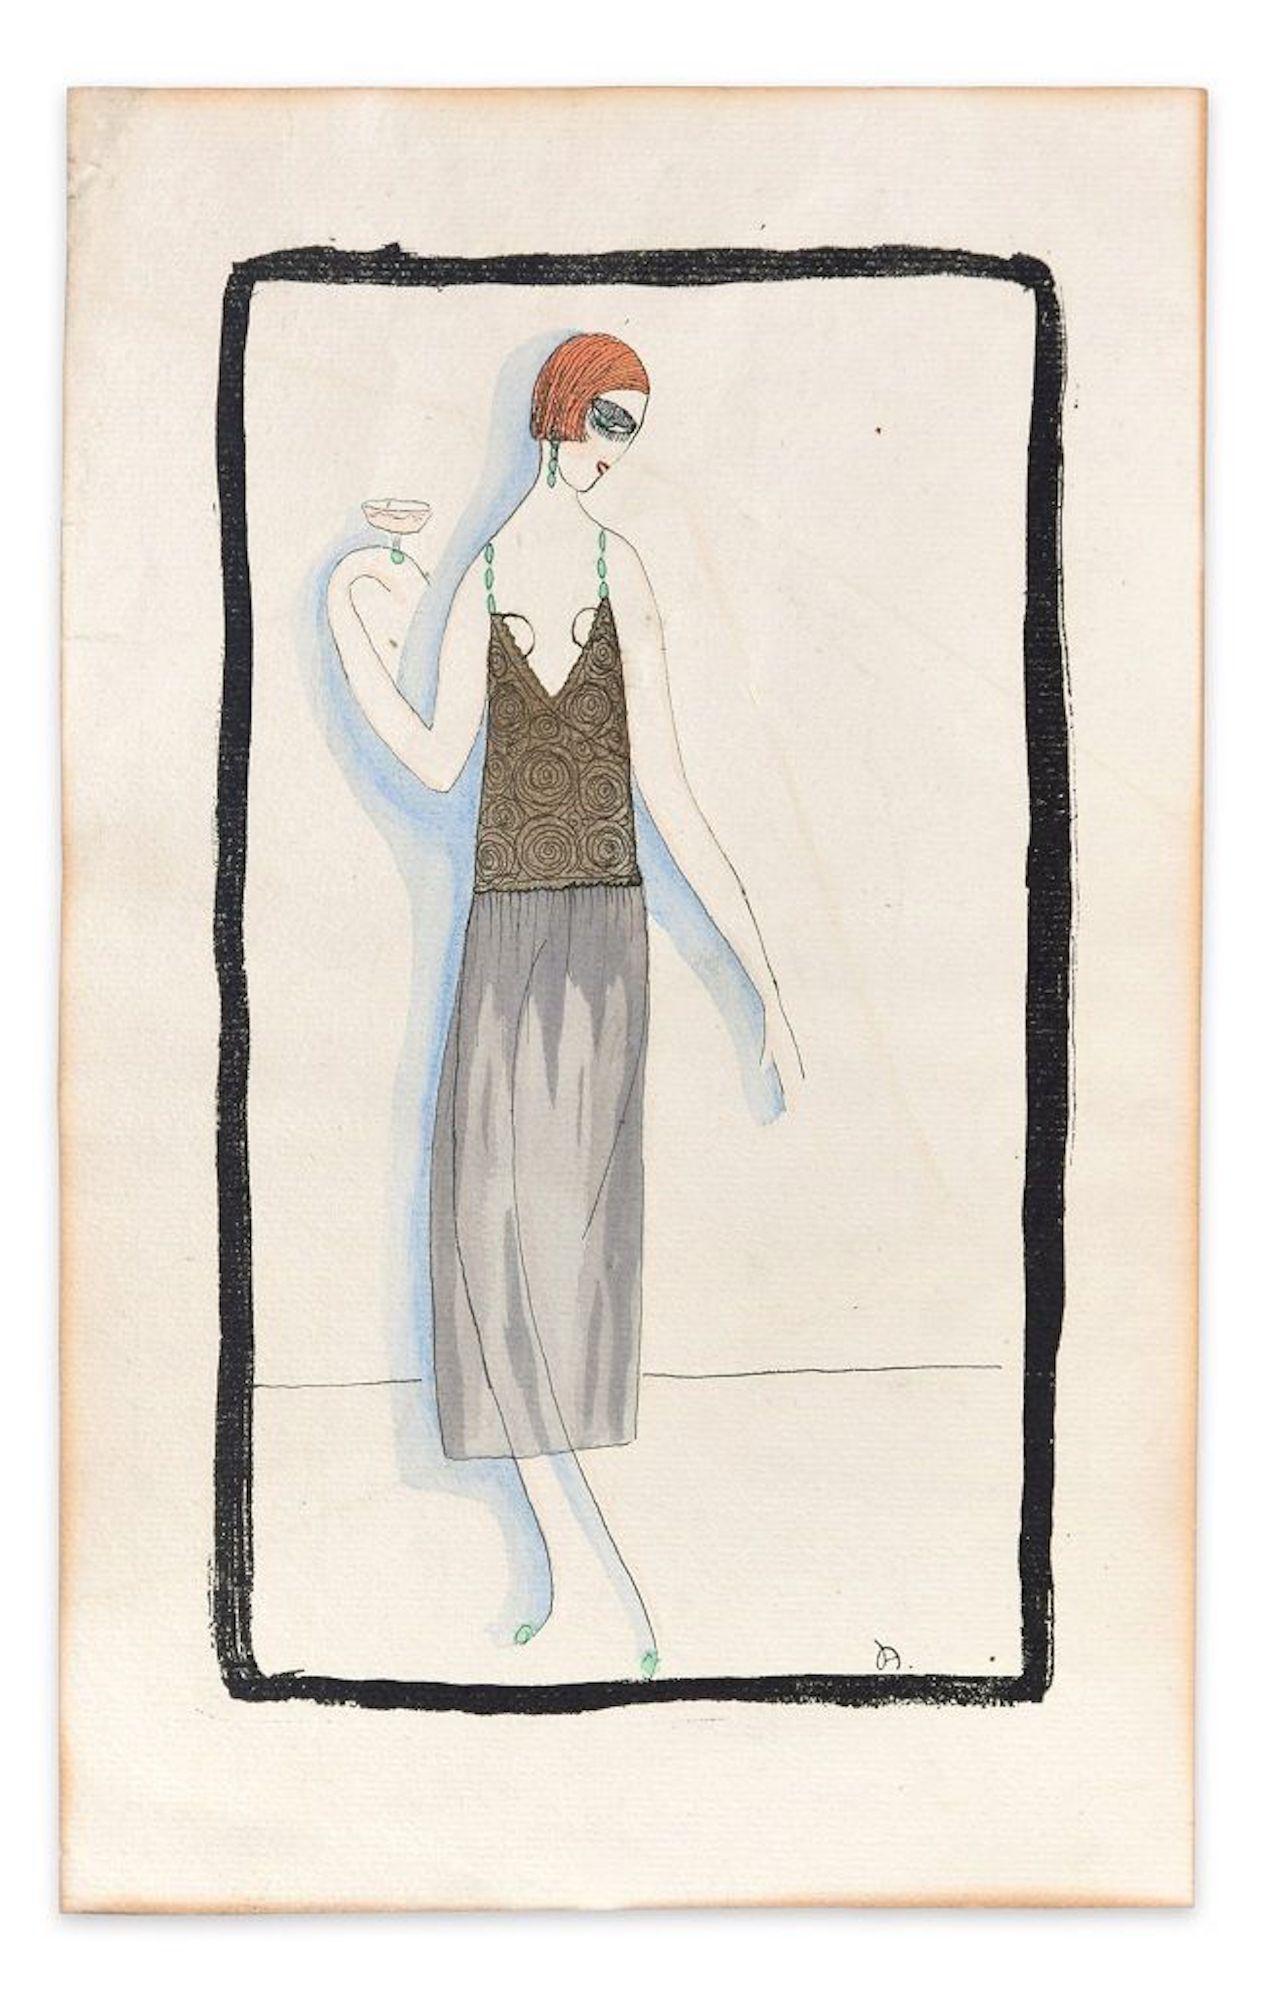 Unknown Figurative Print - Woman with Drink - Woodcut Hand Colored in Tempera on Paper - Art Deco - 1920s